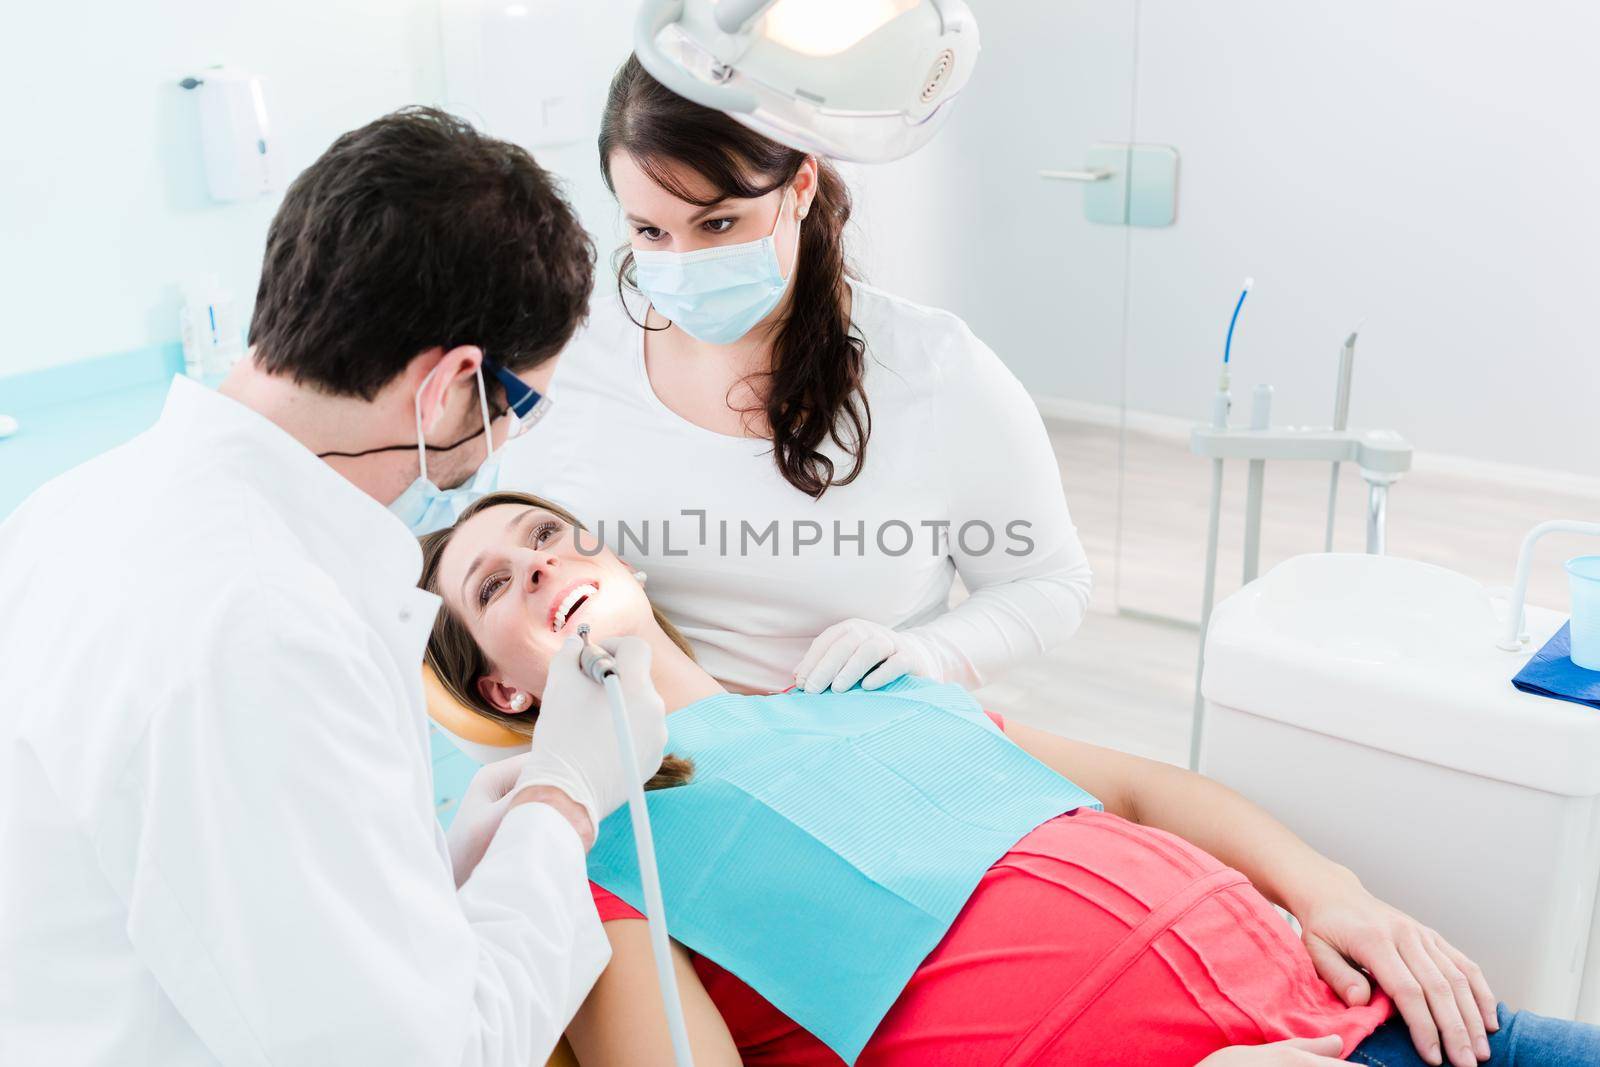 Dentist treating woman patient with drill by Kzenon